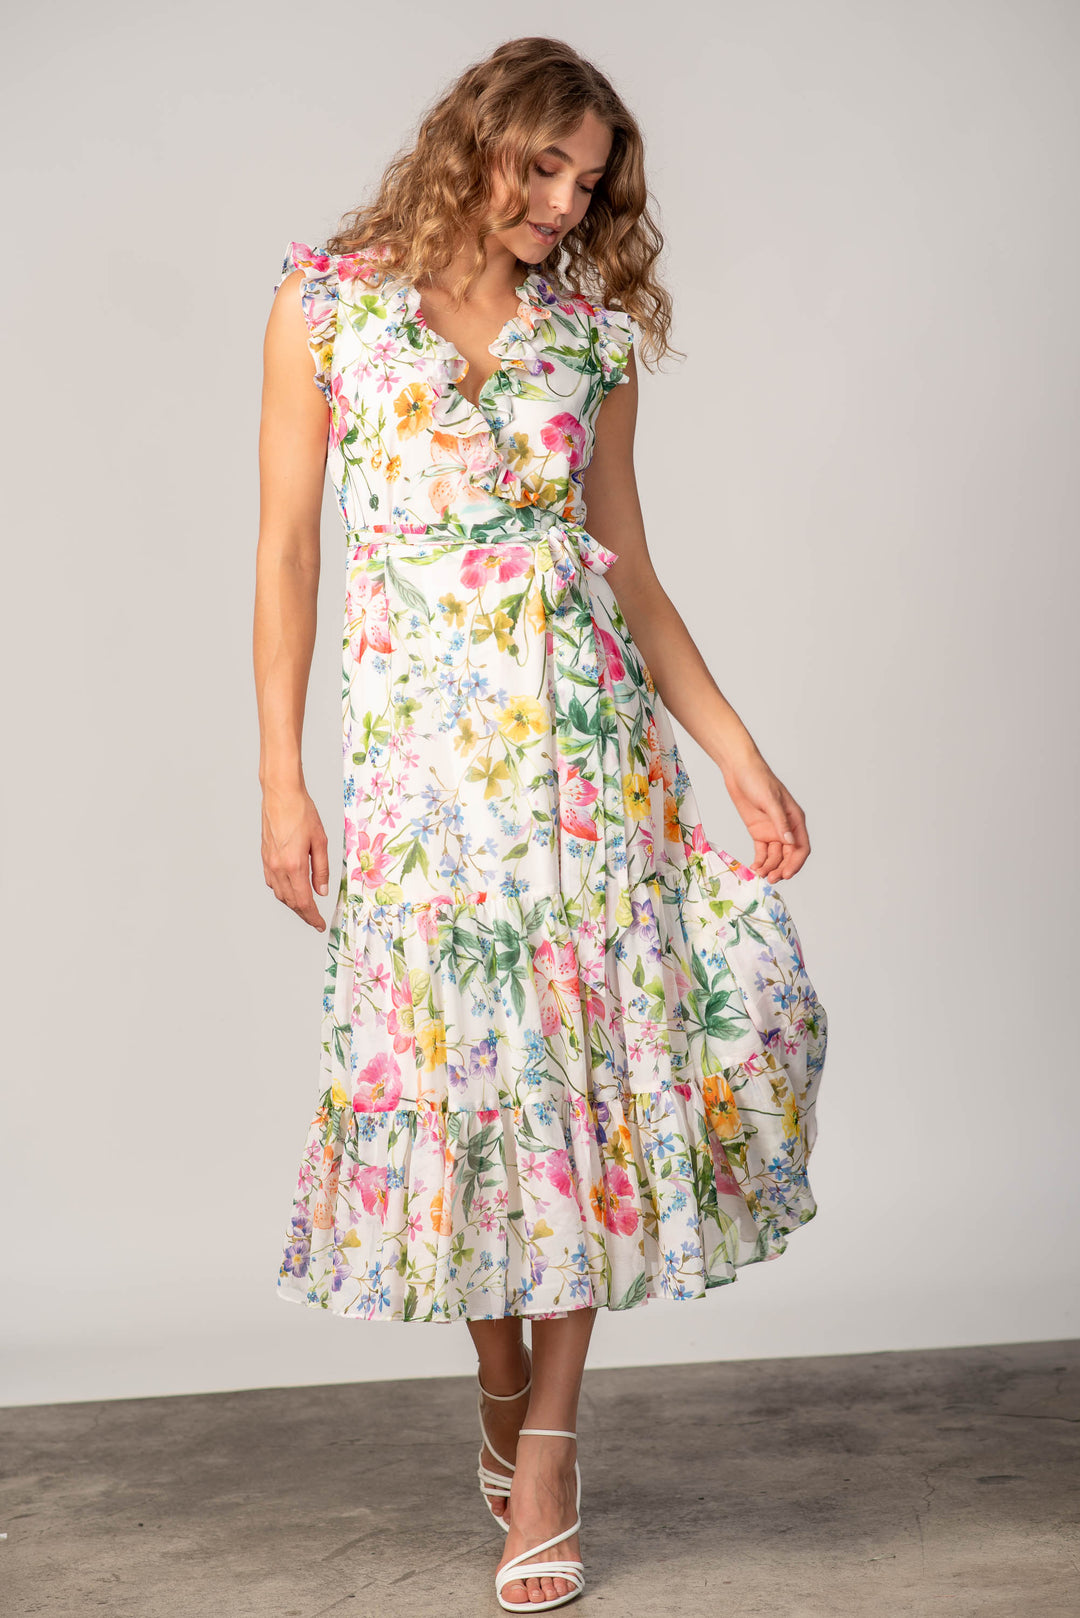 Giselle Dress by Lavender Brown